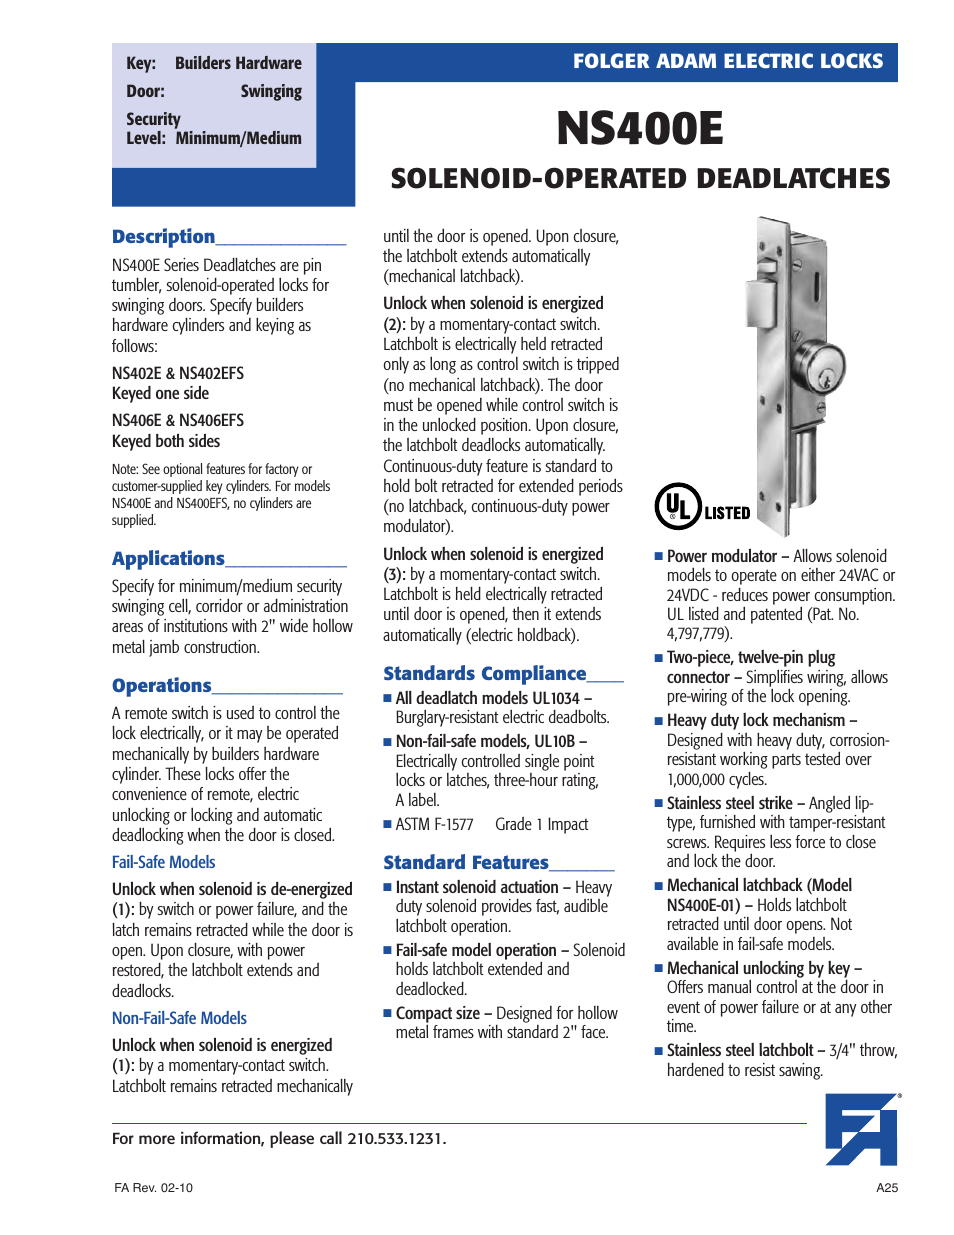 NS400E SOLENOID-OPERATED DEADLATCHES